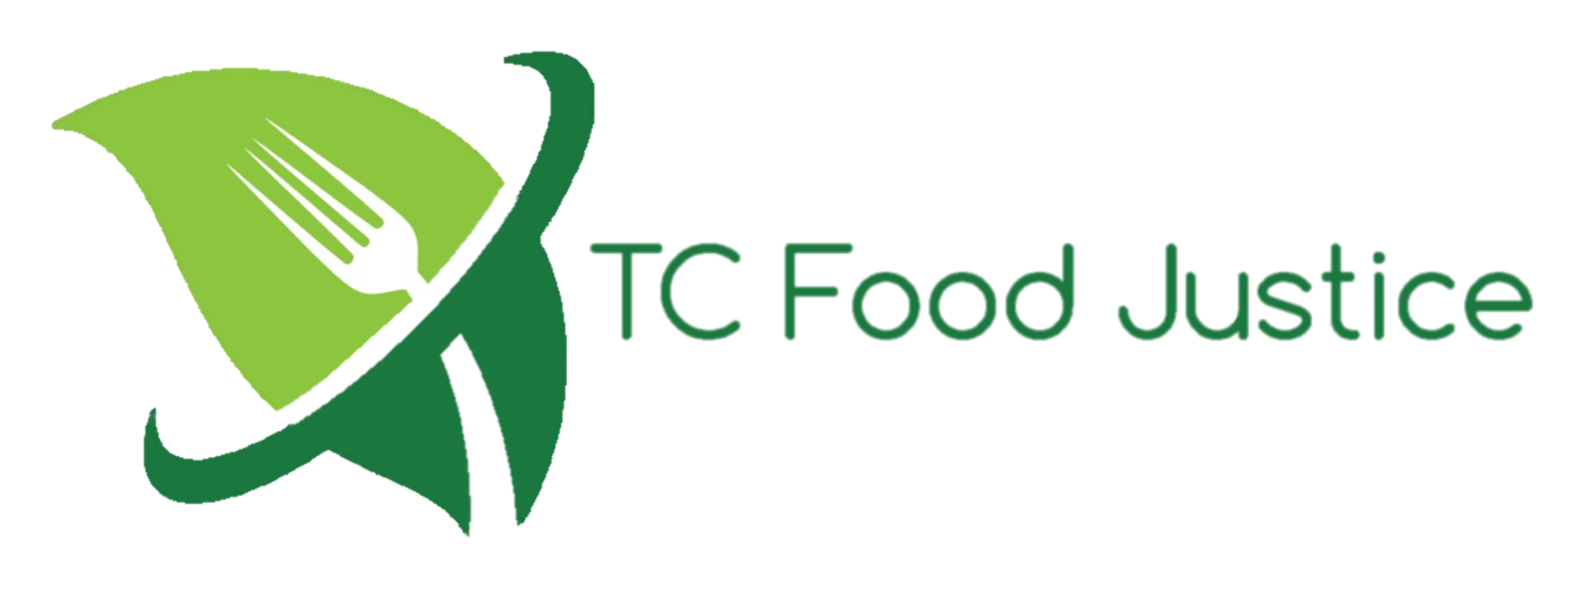 twin city's food justice logo